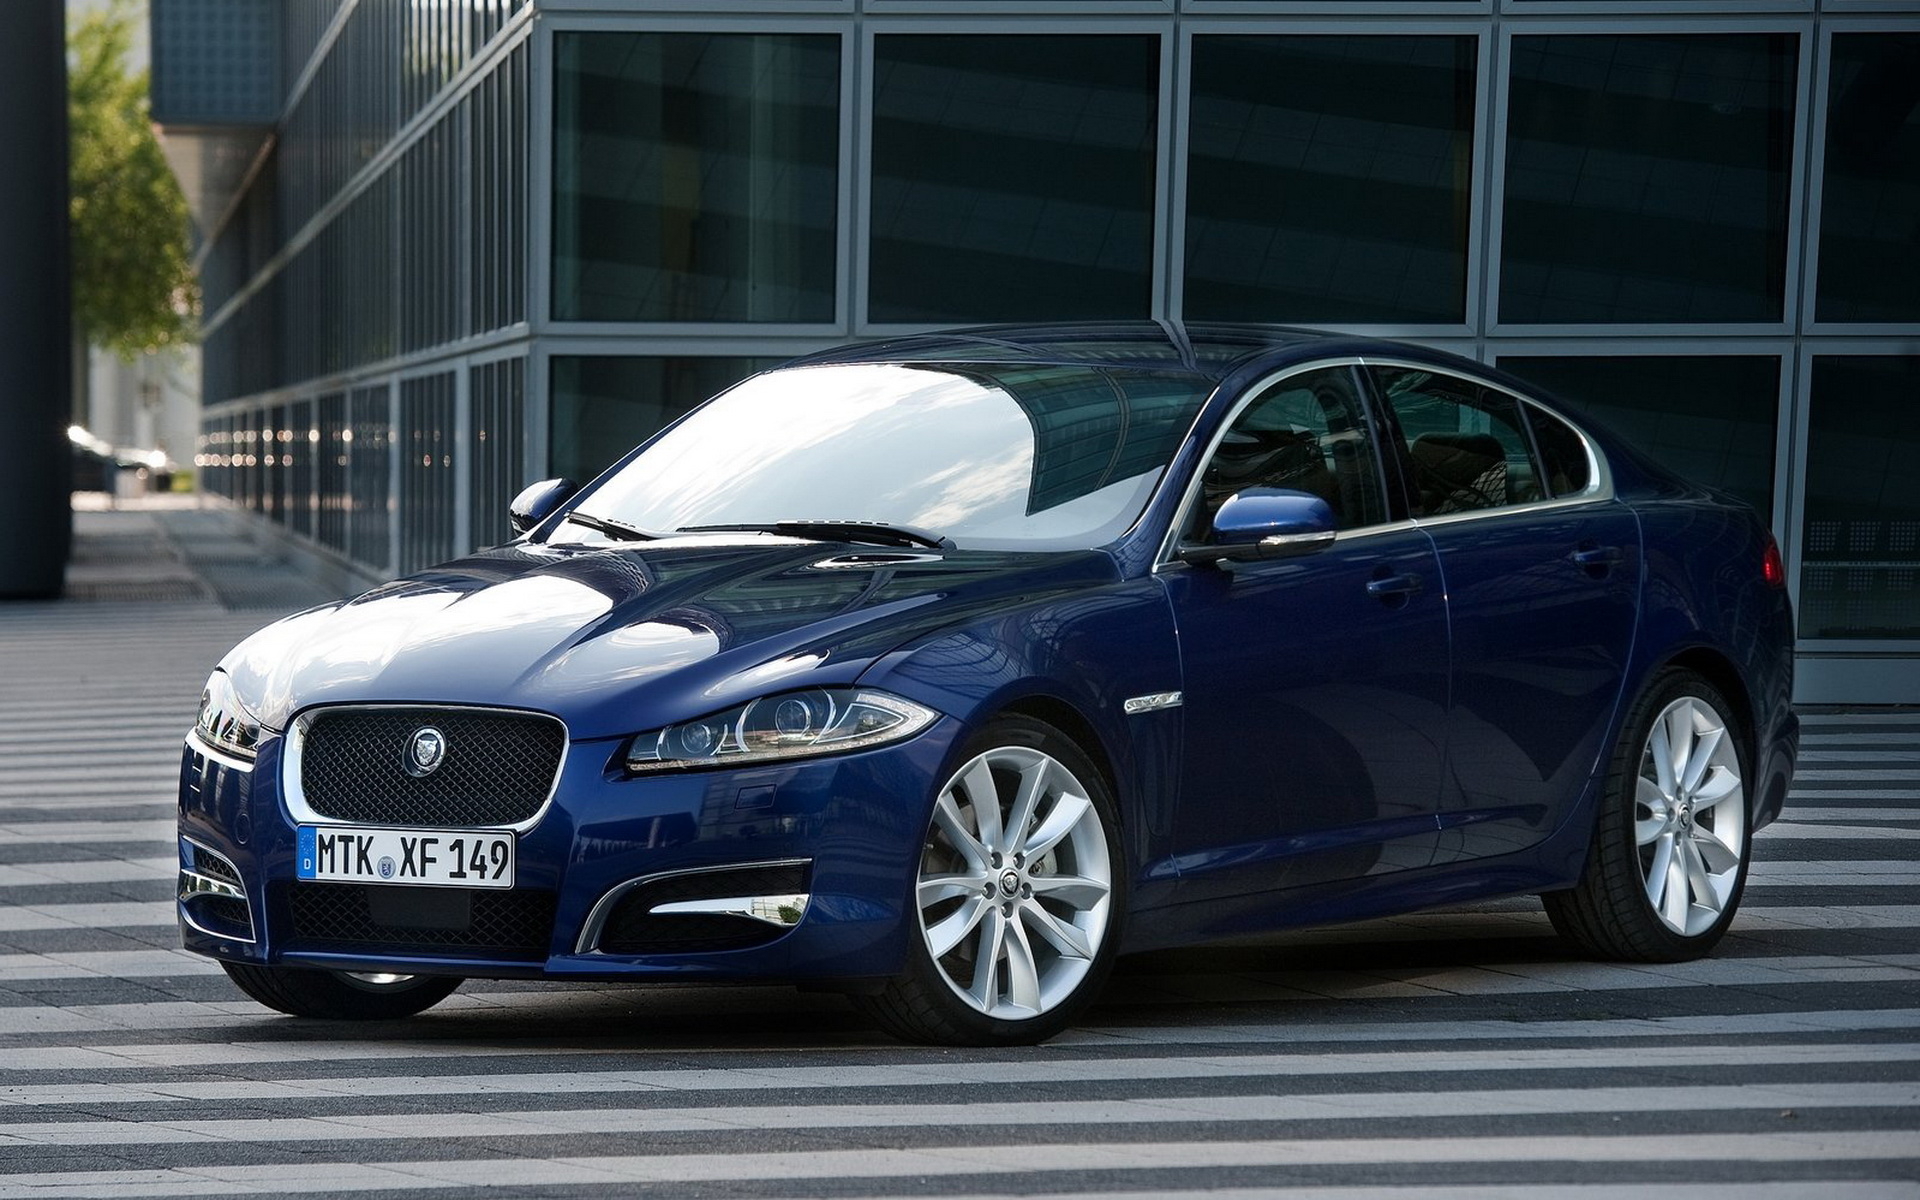 Jaguar-XF 2012 wallpapers and images - wallpapers ...